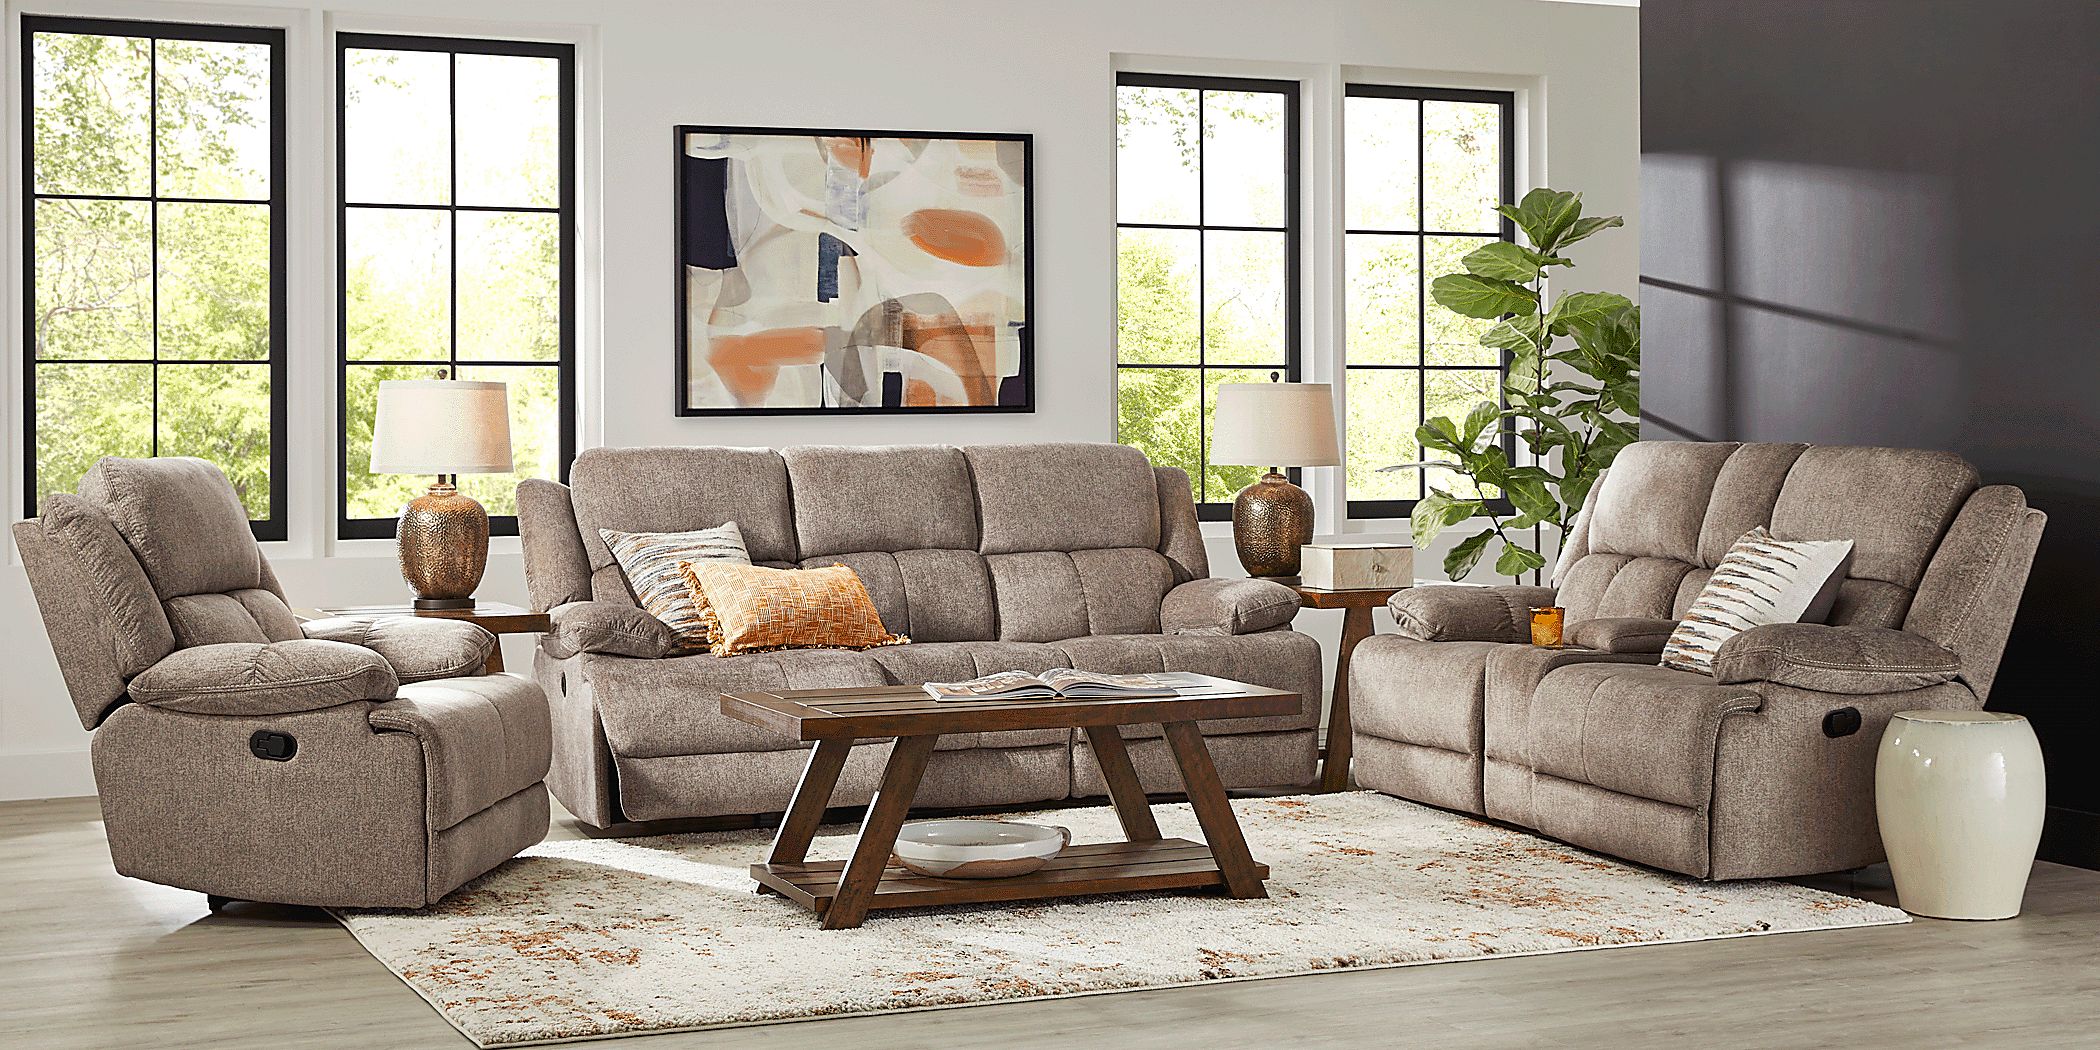 Townsend Brown 7 Pc Reclining Living Room